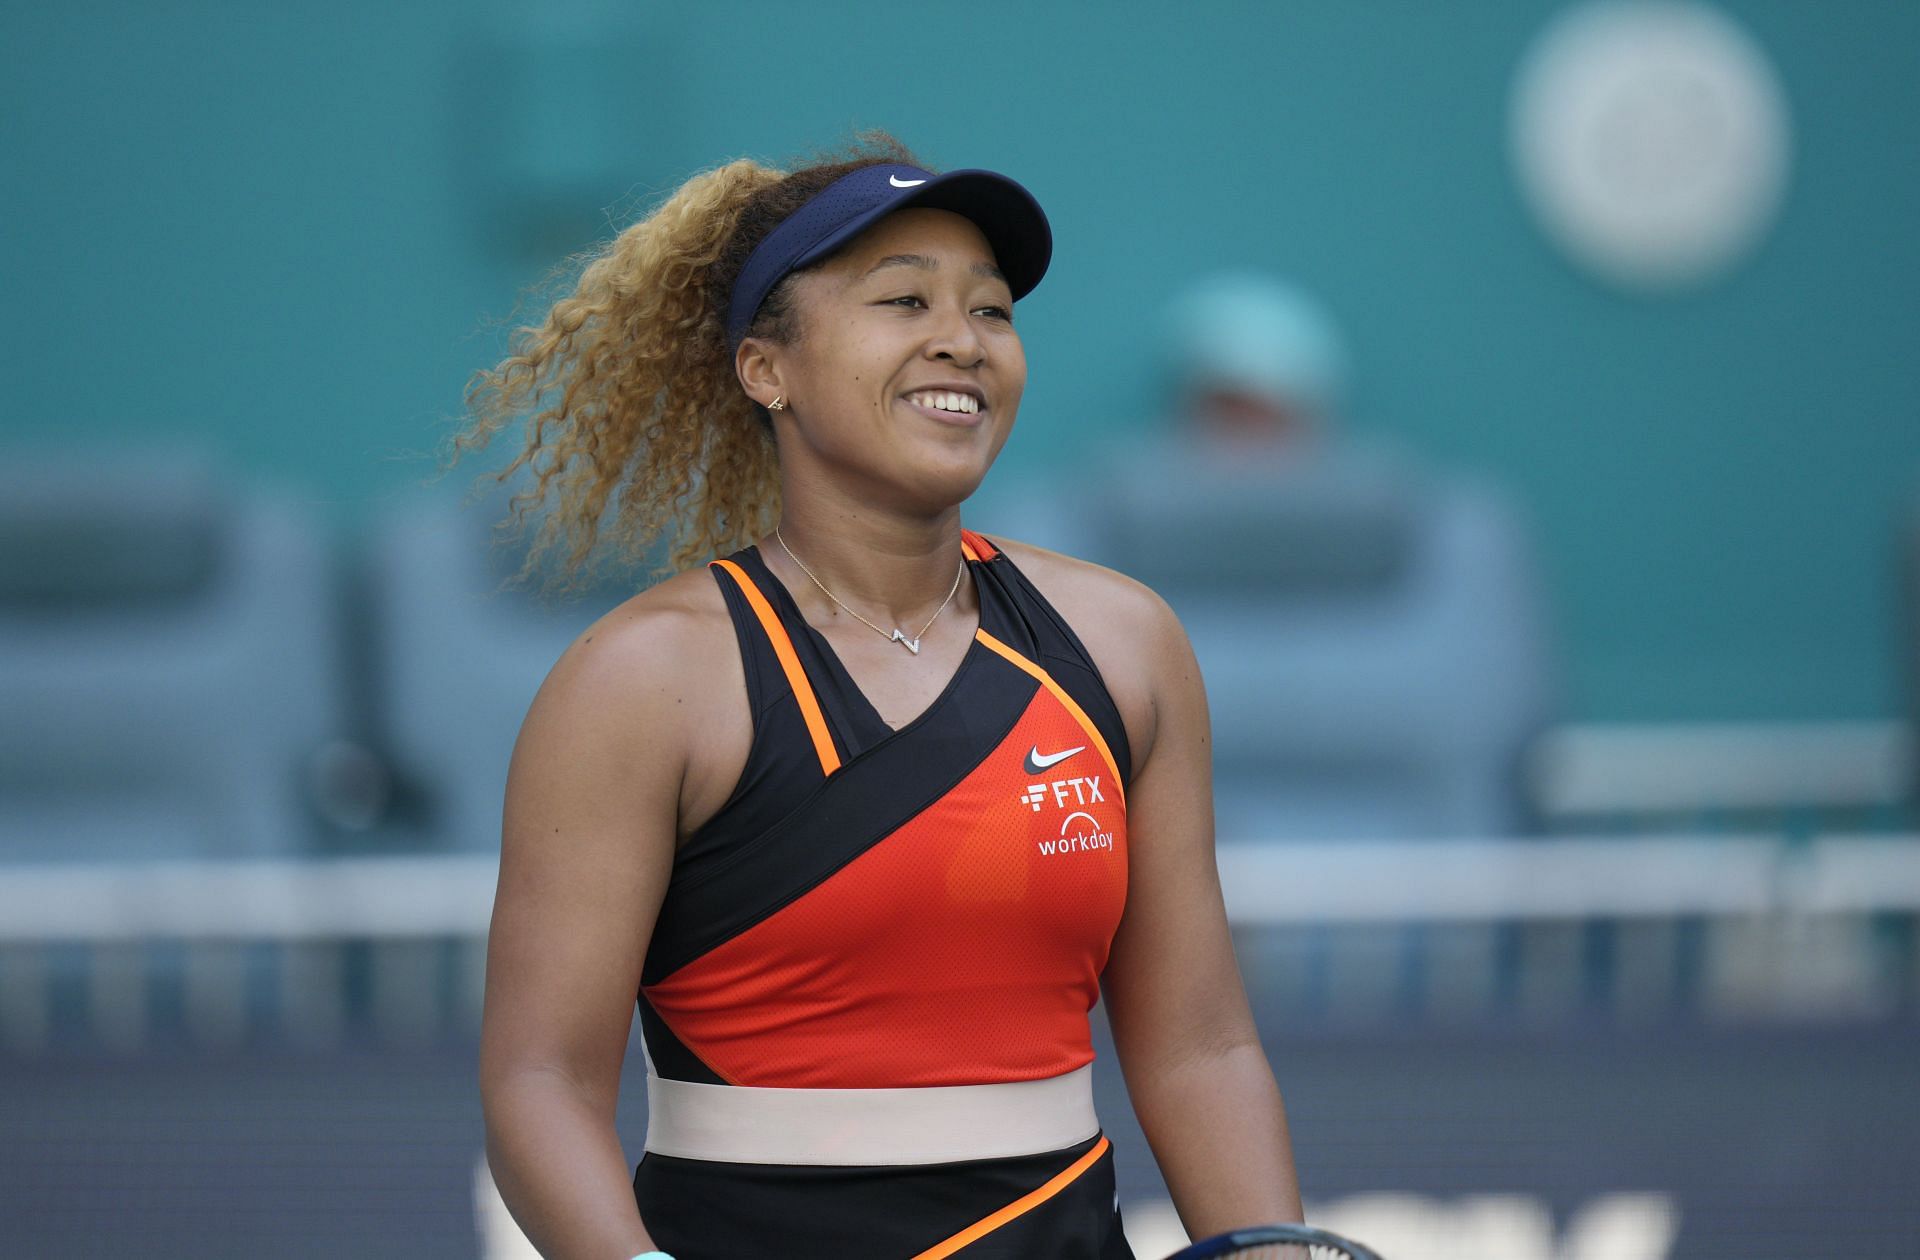 Miami Open 2022 Schedule Today TV schedule, start time, order of play, live streaming details and more Day 9